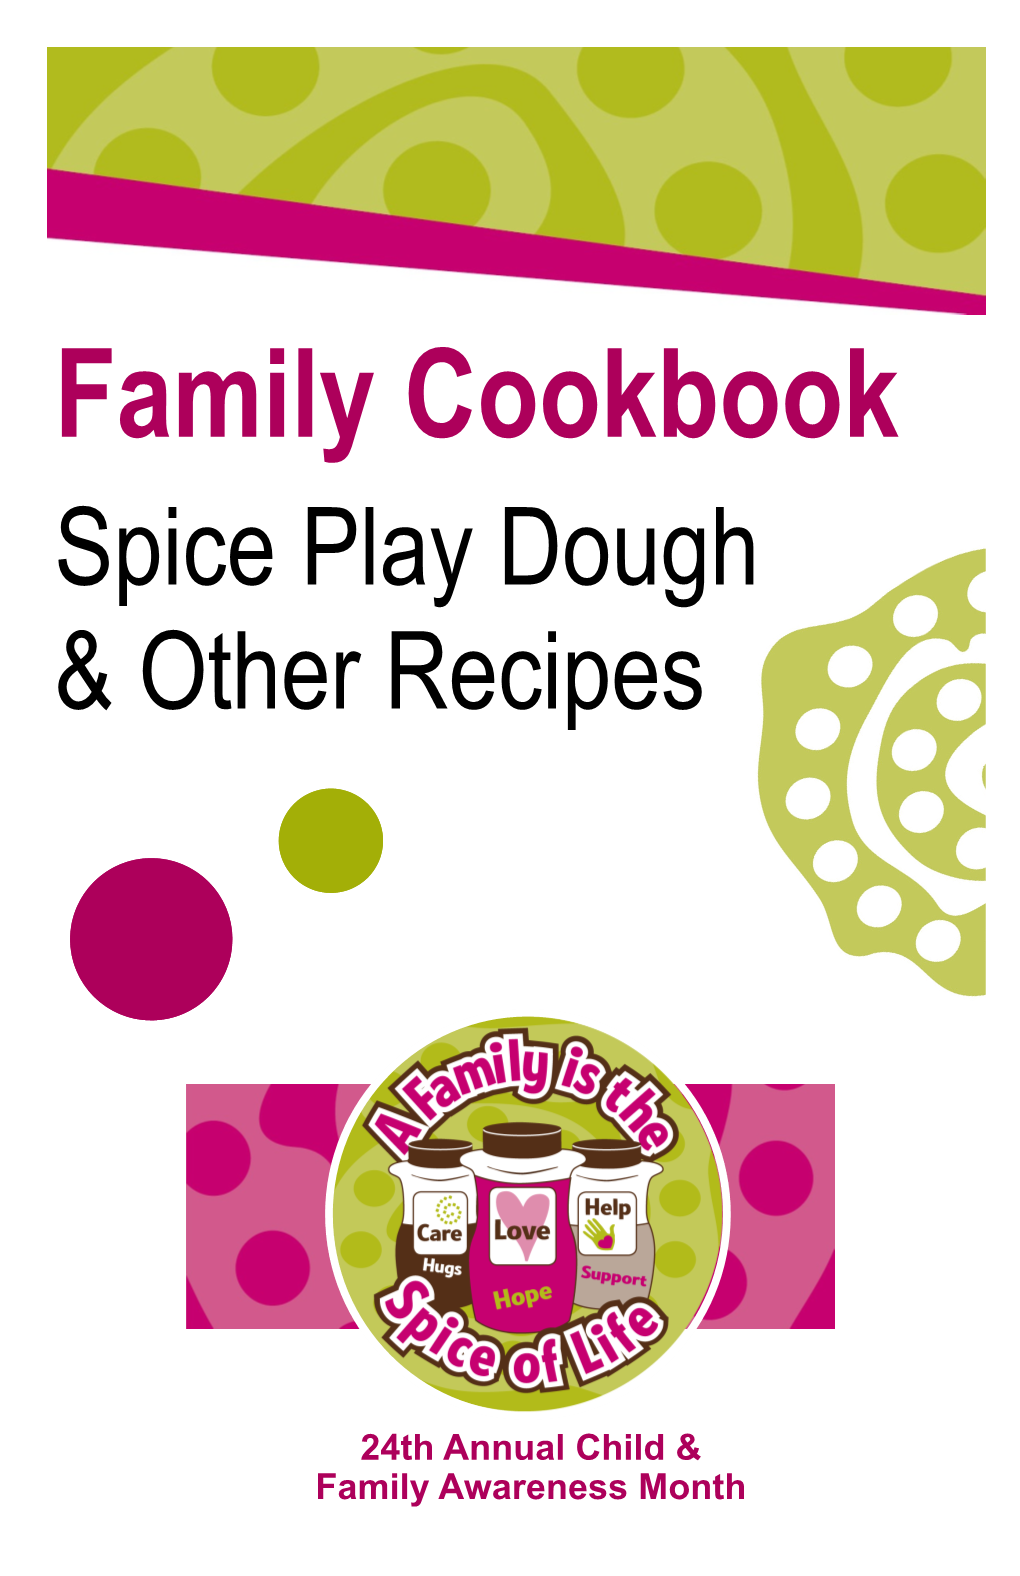 Family Cookbook Spice Play Dough & Other Recipes